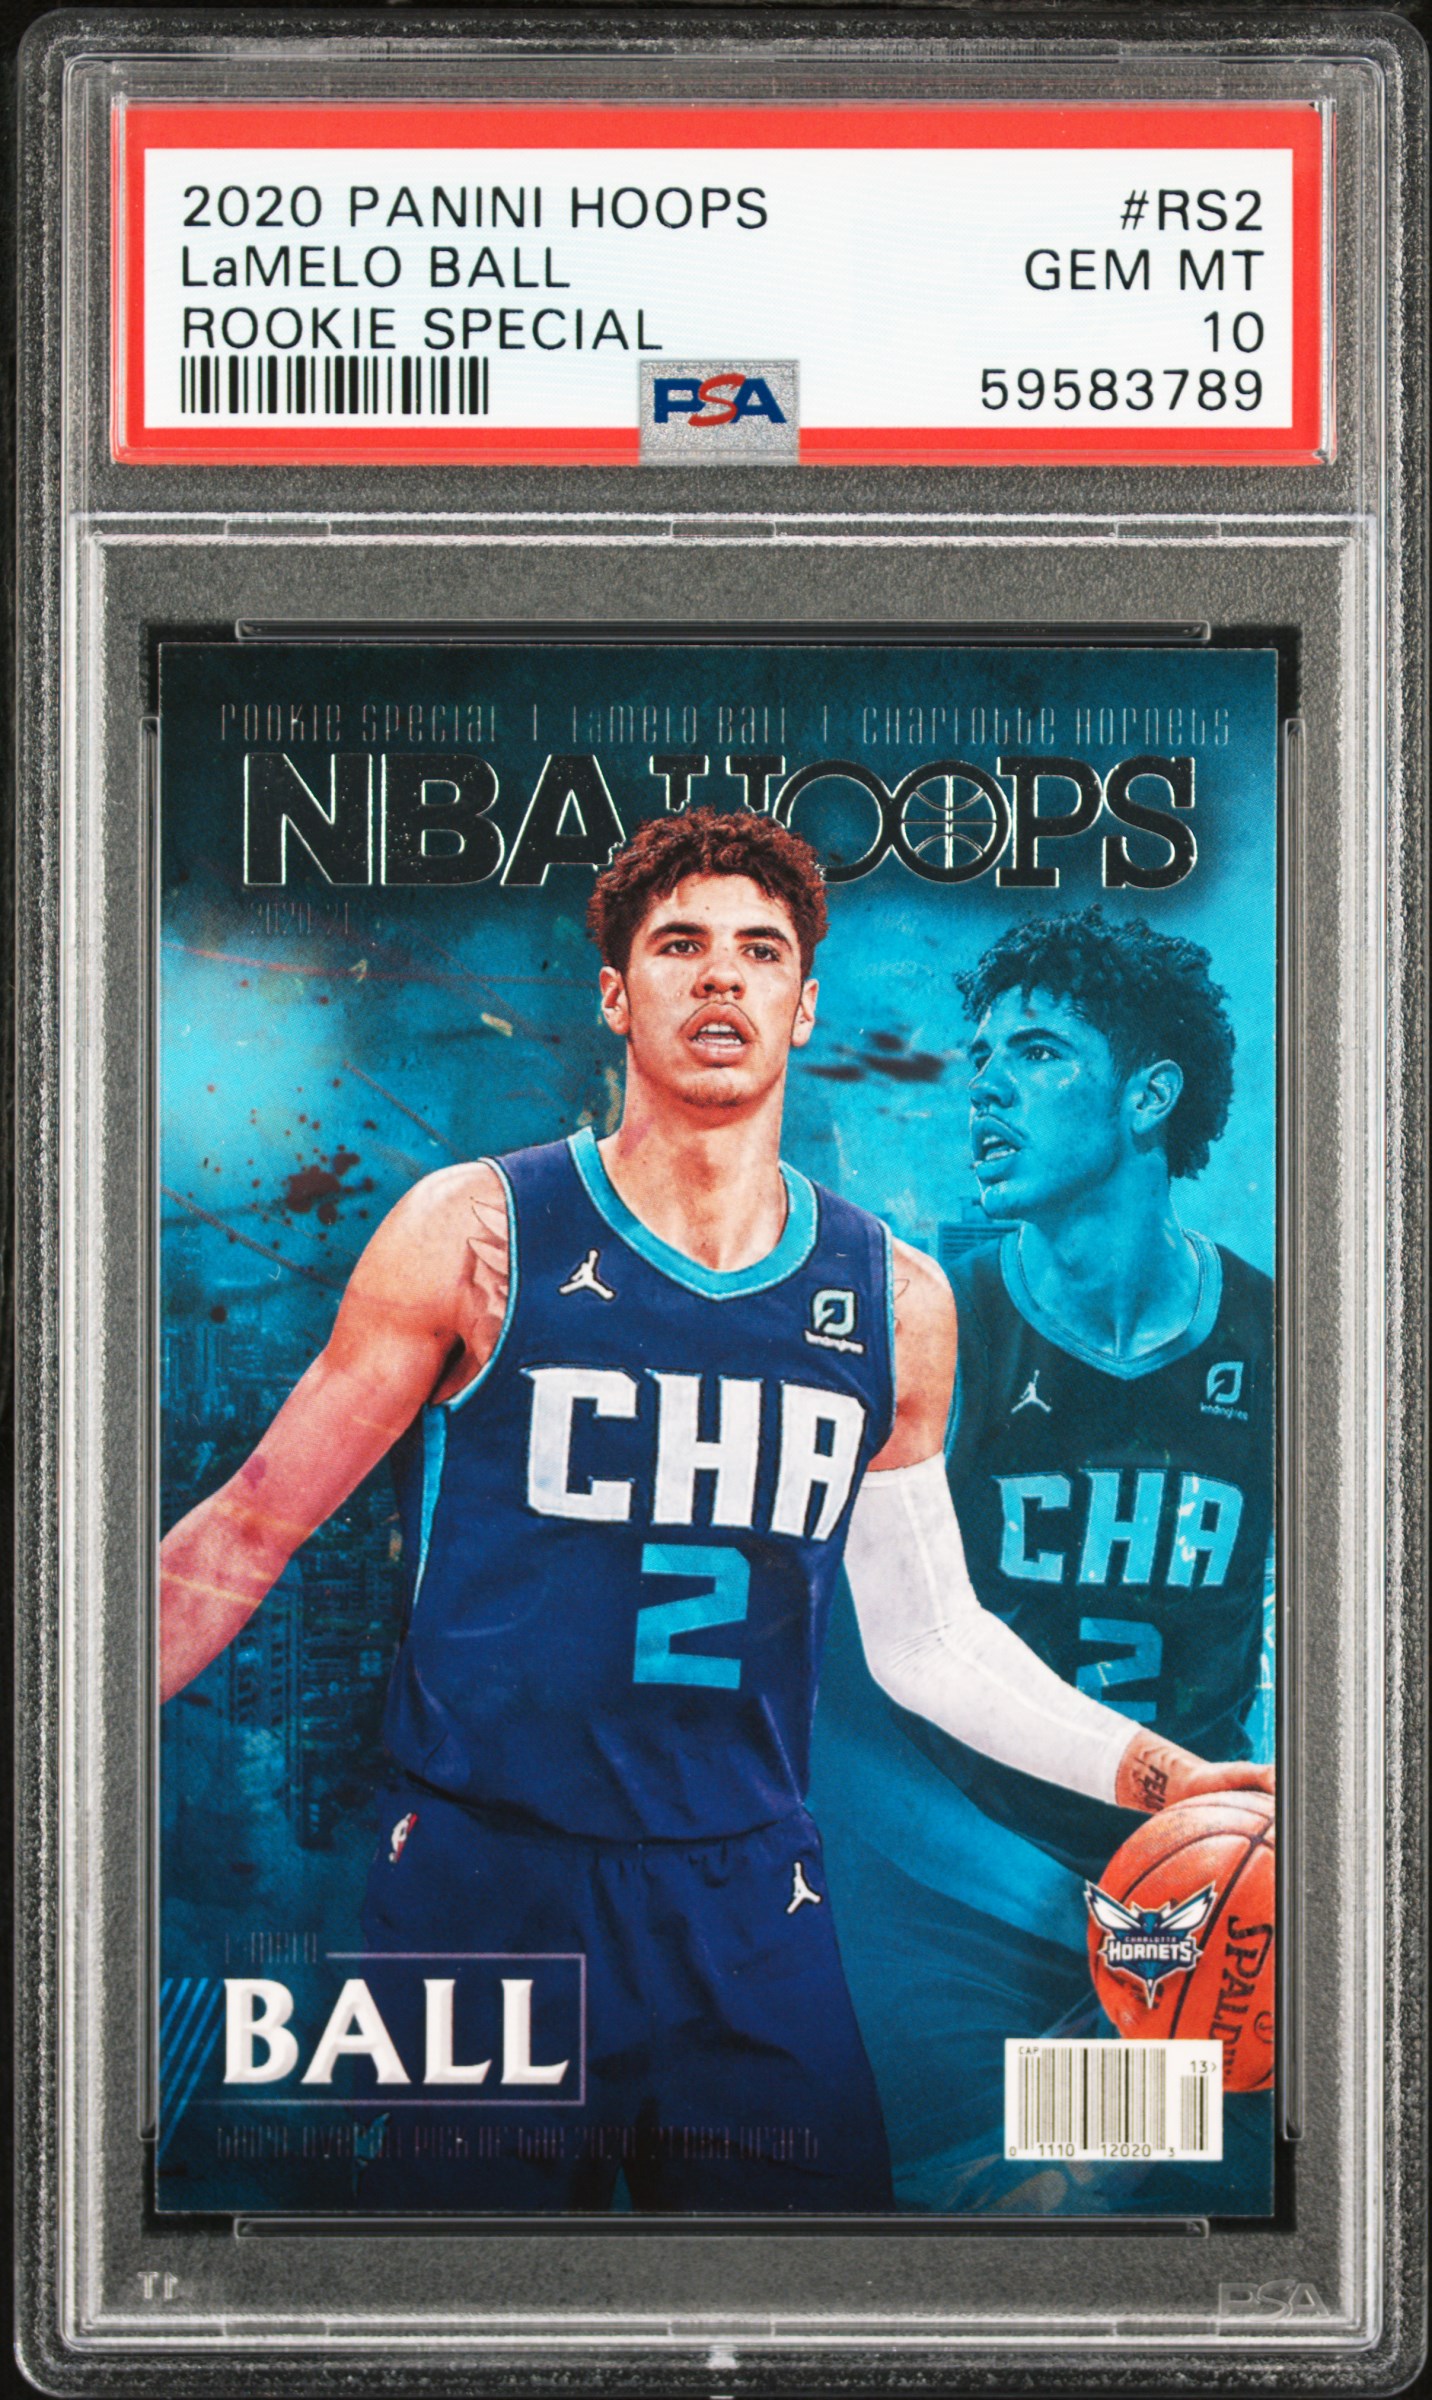 2020 Panini Hoops Rookie Special #Rs2 Lamelo Ball PSA 10